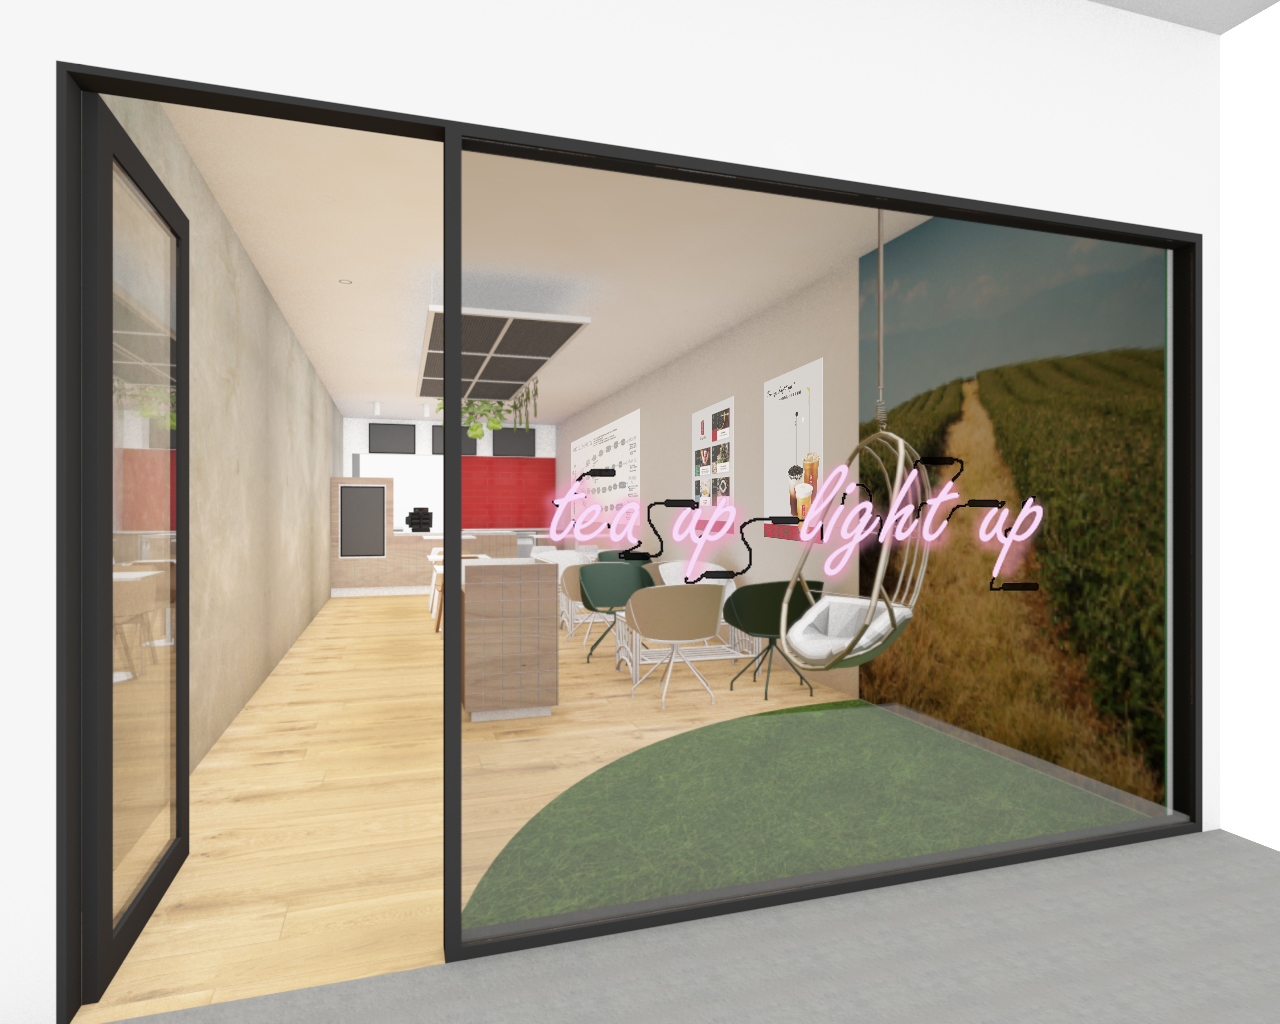 A 3D rendering of the new Gong Cha store in Takapuna